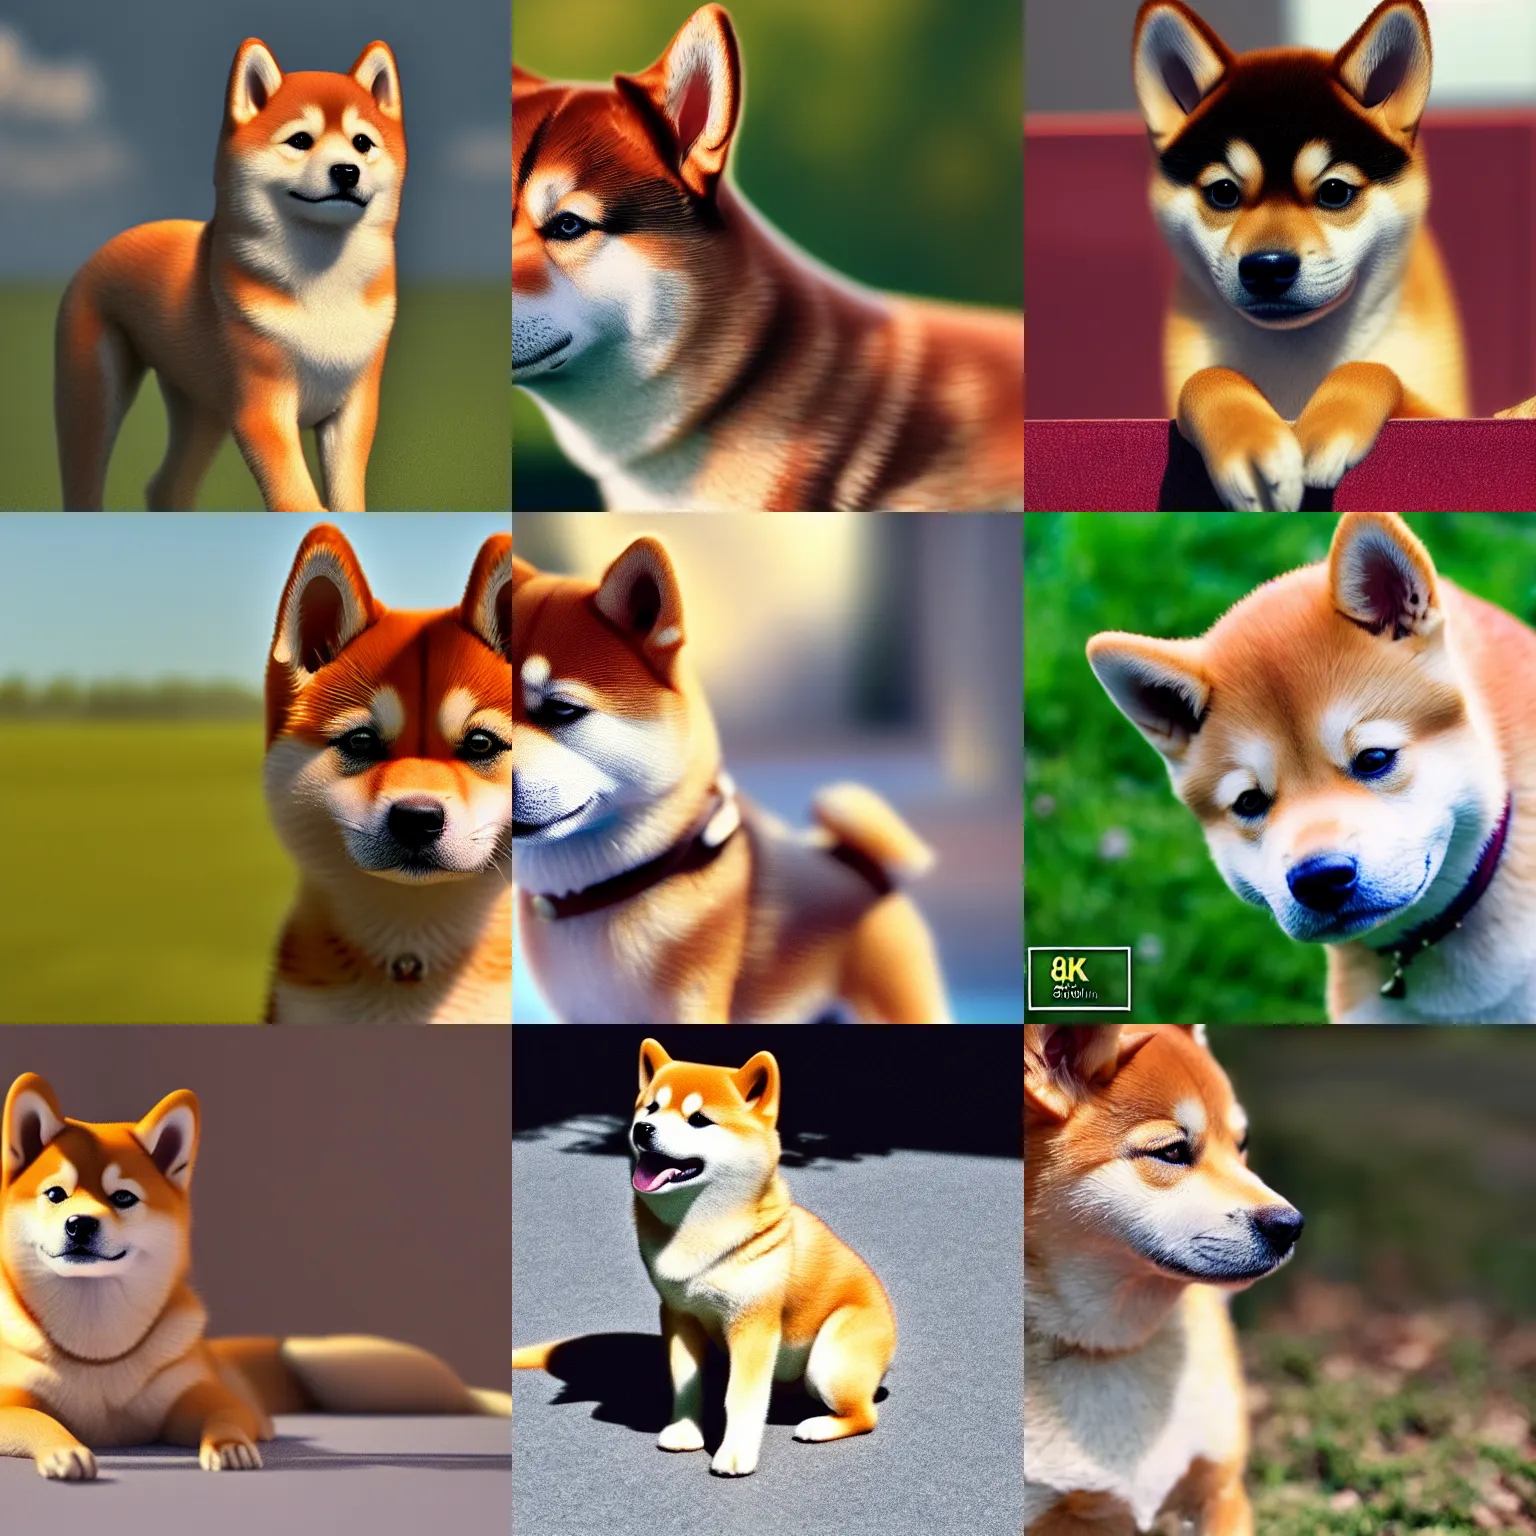 High resolution 8k movie still frame of a young shiba | Stable ...